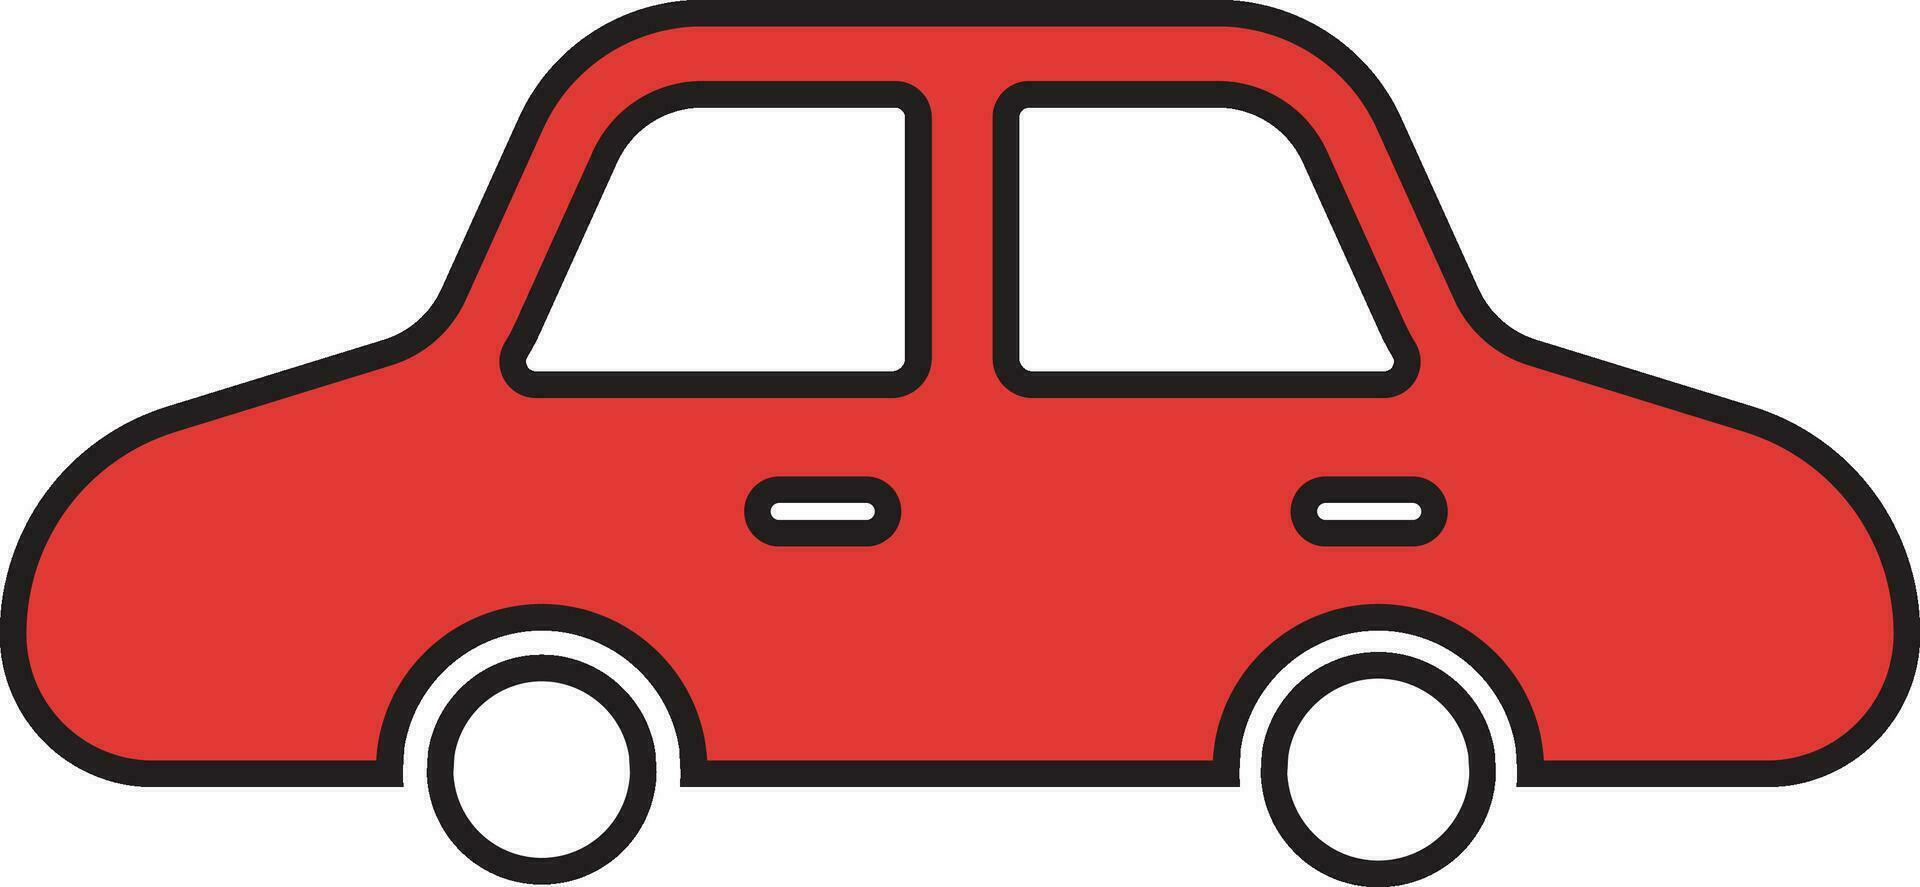 Red And White Color Car Icon In Flat Style. vector